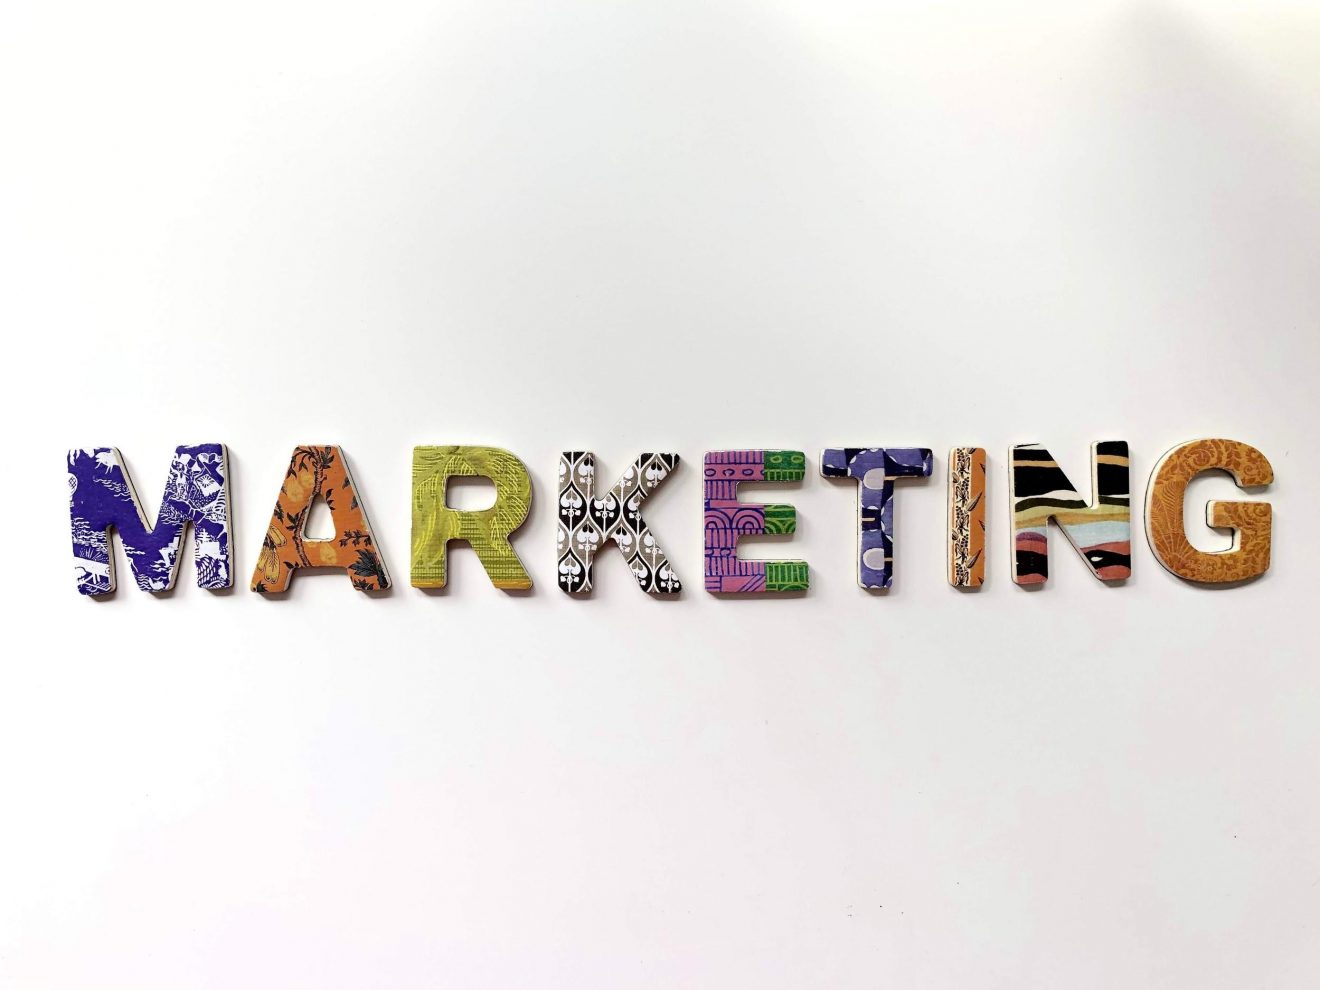 Top Digital Marketing Strategies To Take Your Business To The Next Level